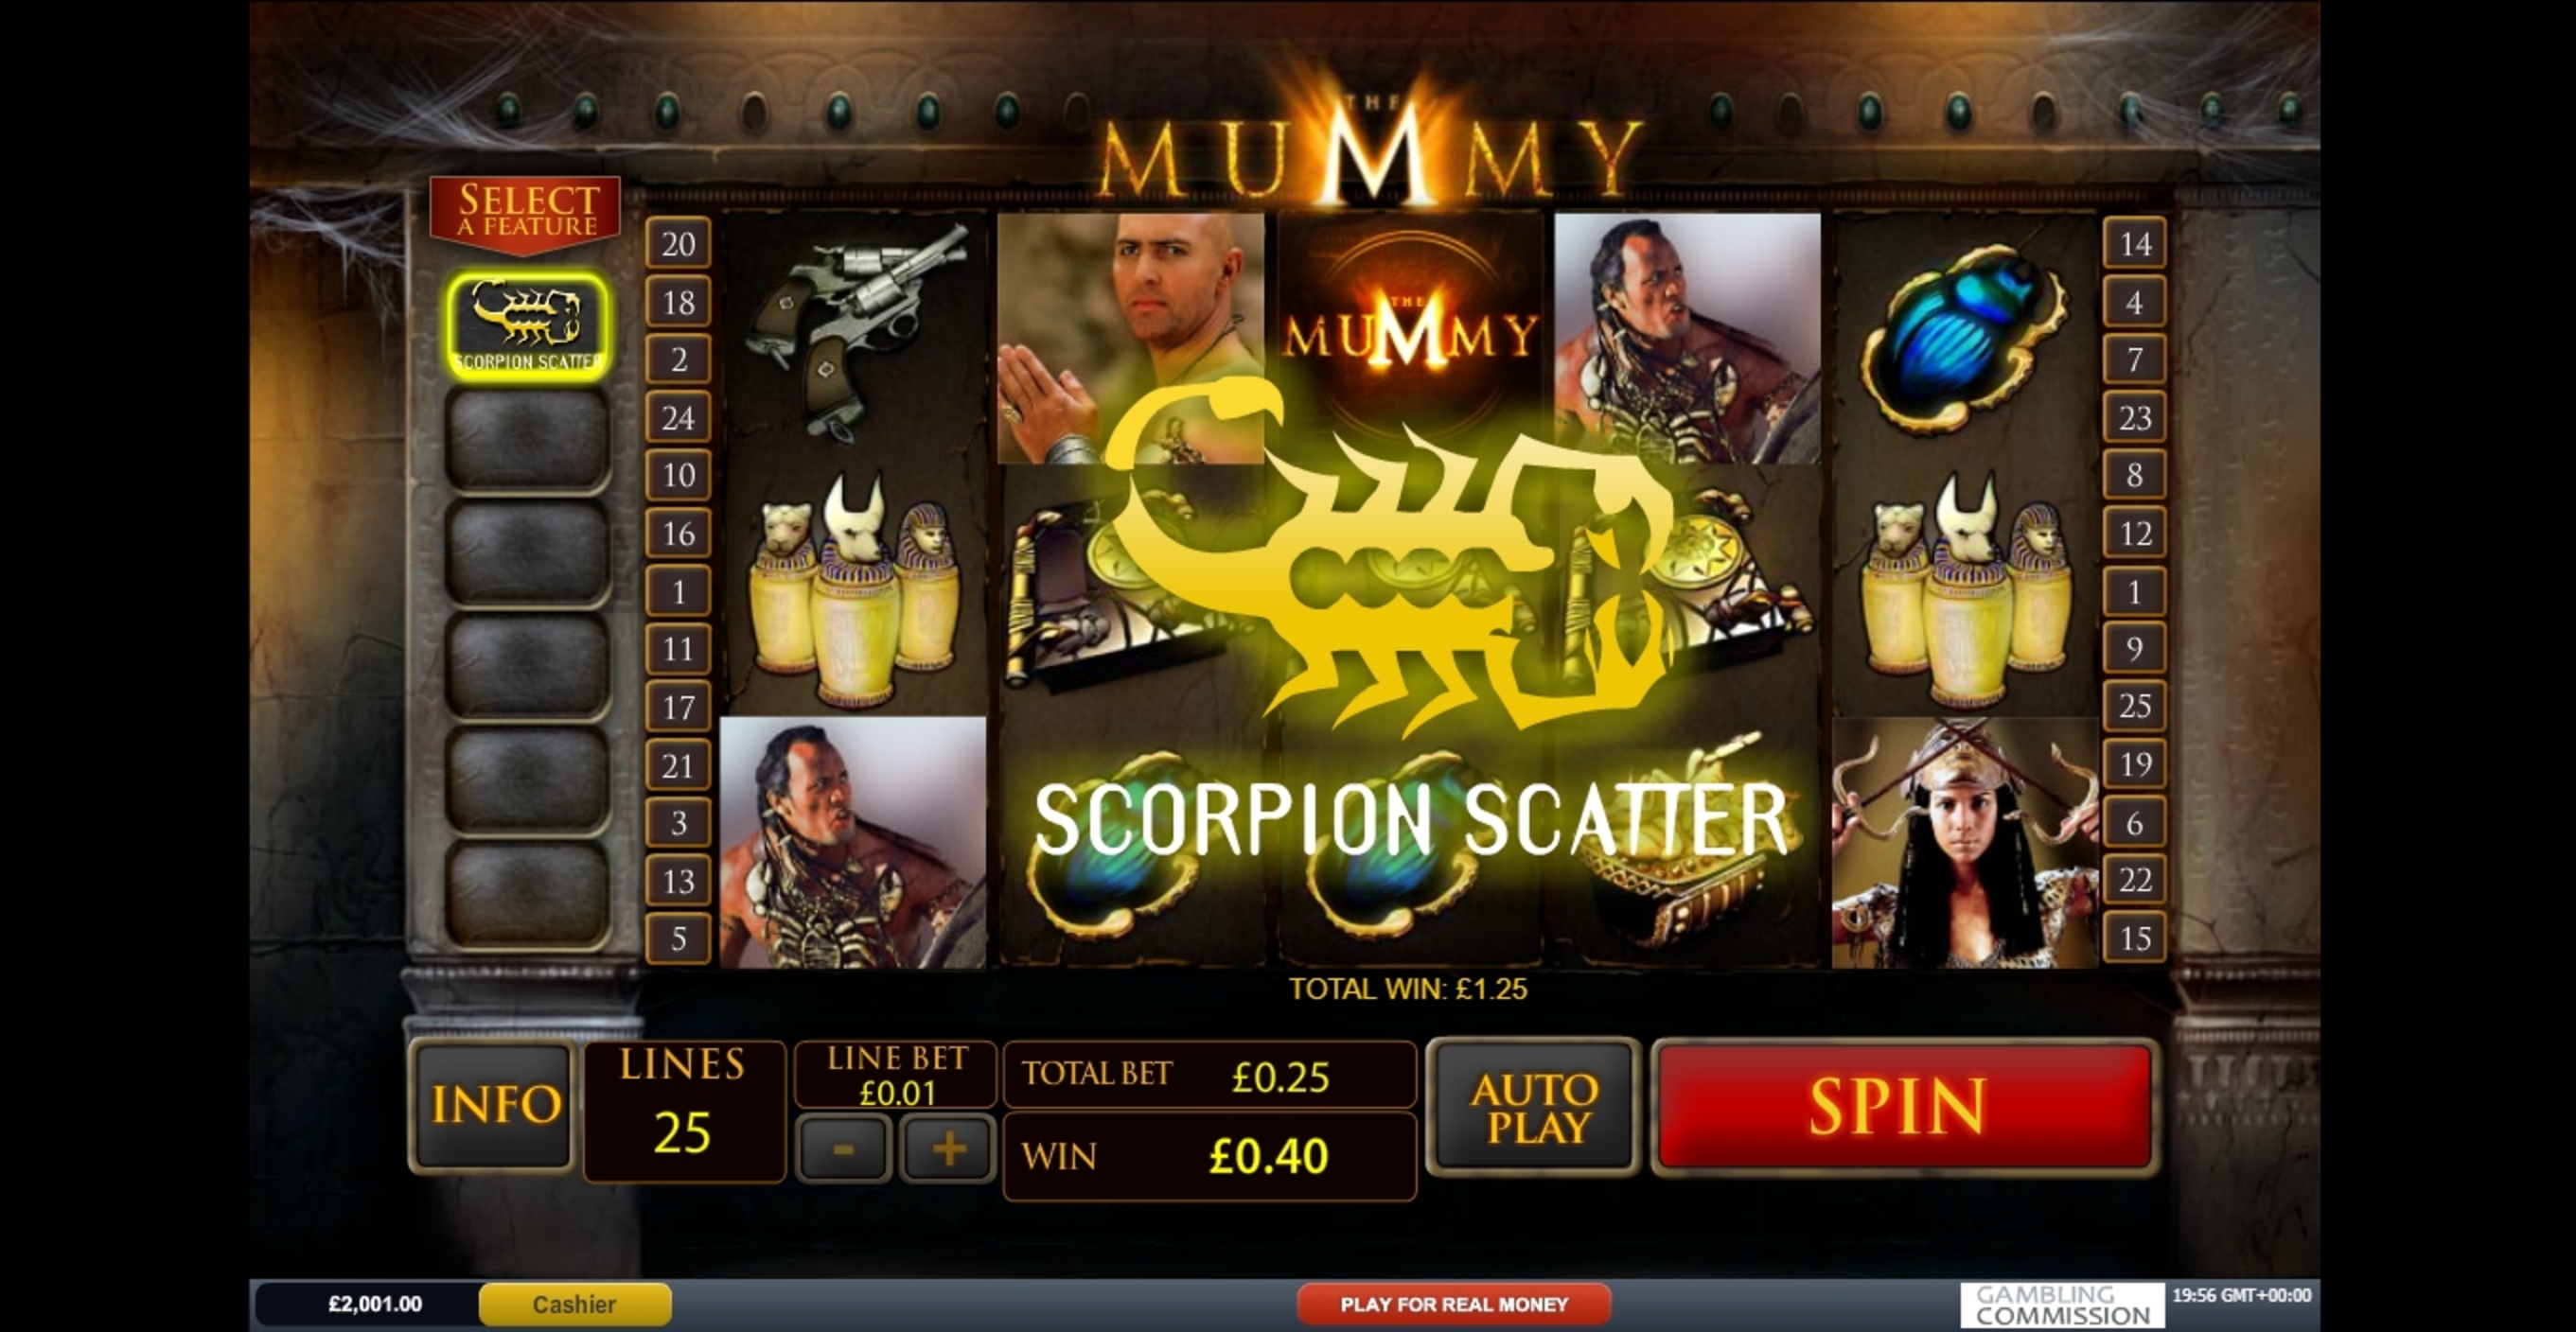 Win Money in The Mummy Free Slot Game by Playtech